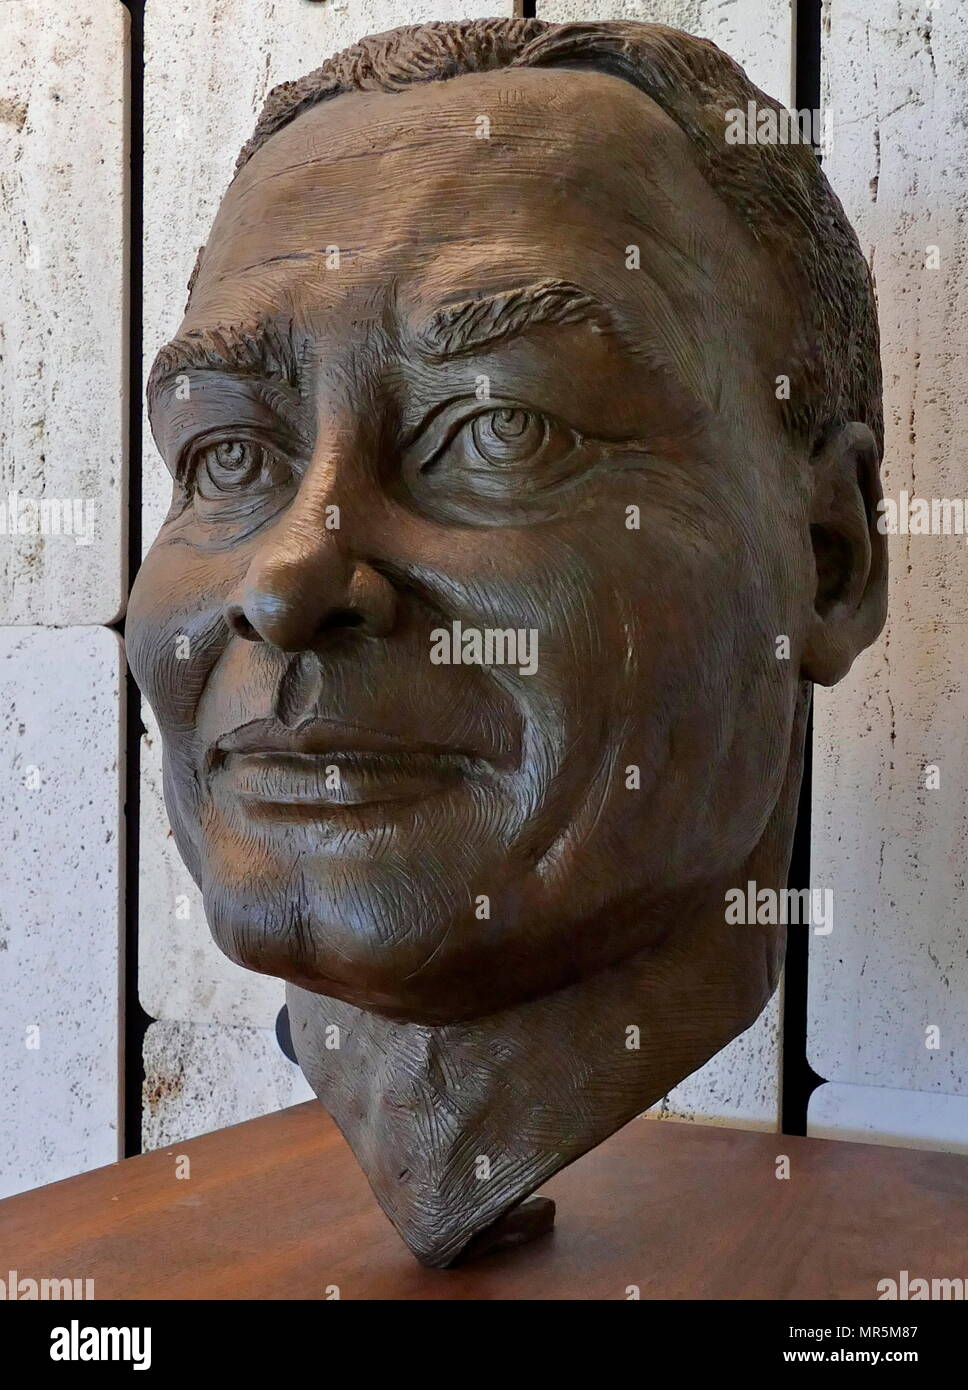 Bust of Ralph Johnson Bunche (1903 – 1971). American political scientist, academic, and diplomat. received the 1950 Nobel Peace Prize for his late 1940s mediation in Israel and Palestine. He was the first African American to be awarded the prize. He was involved in the formation and administration of the United Nations. Stock Photo